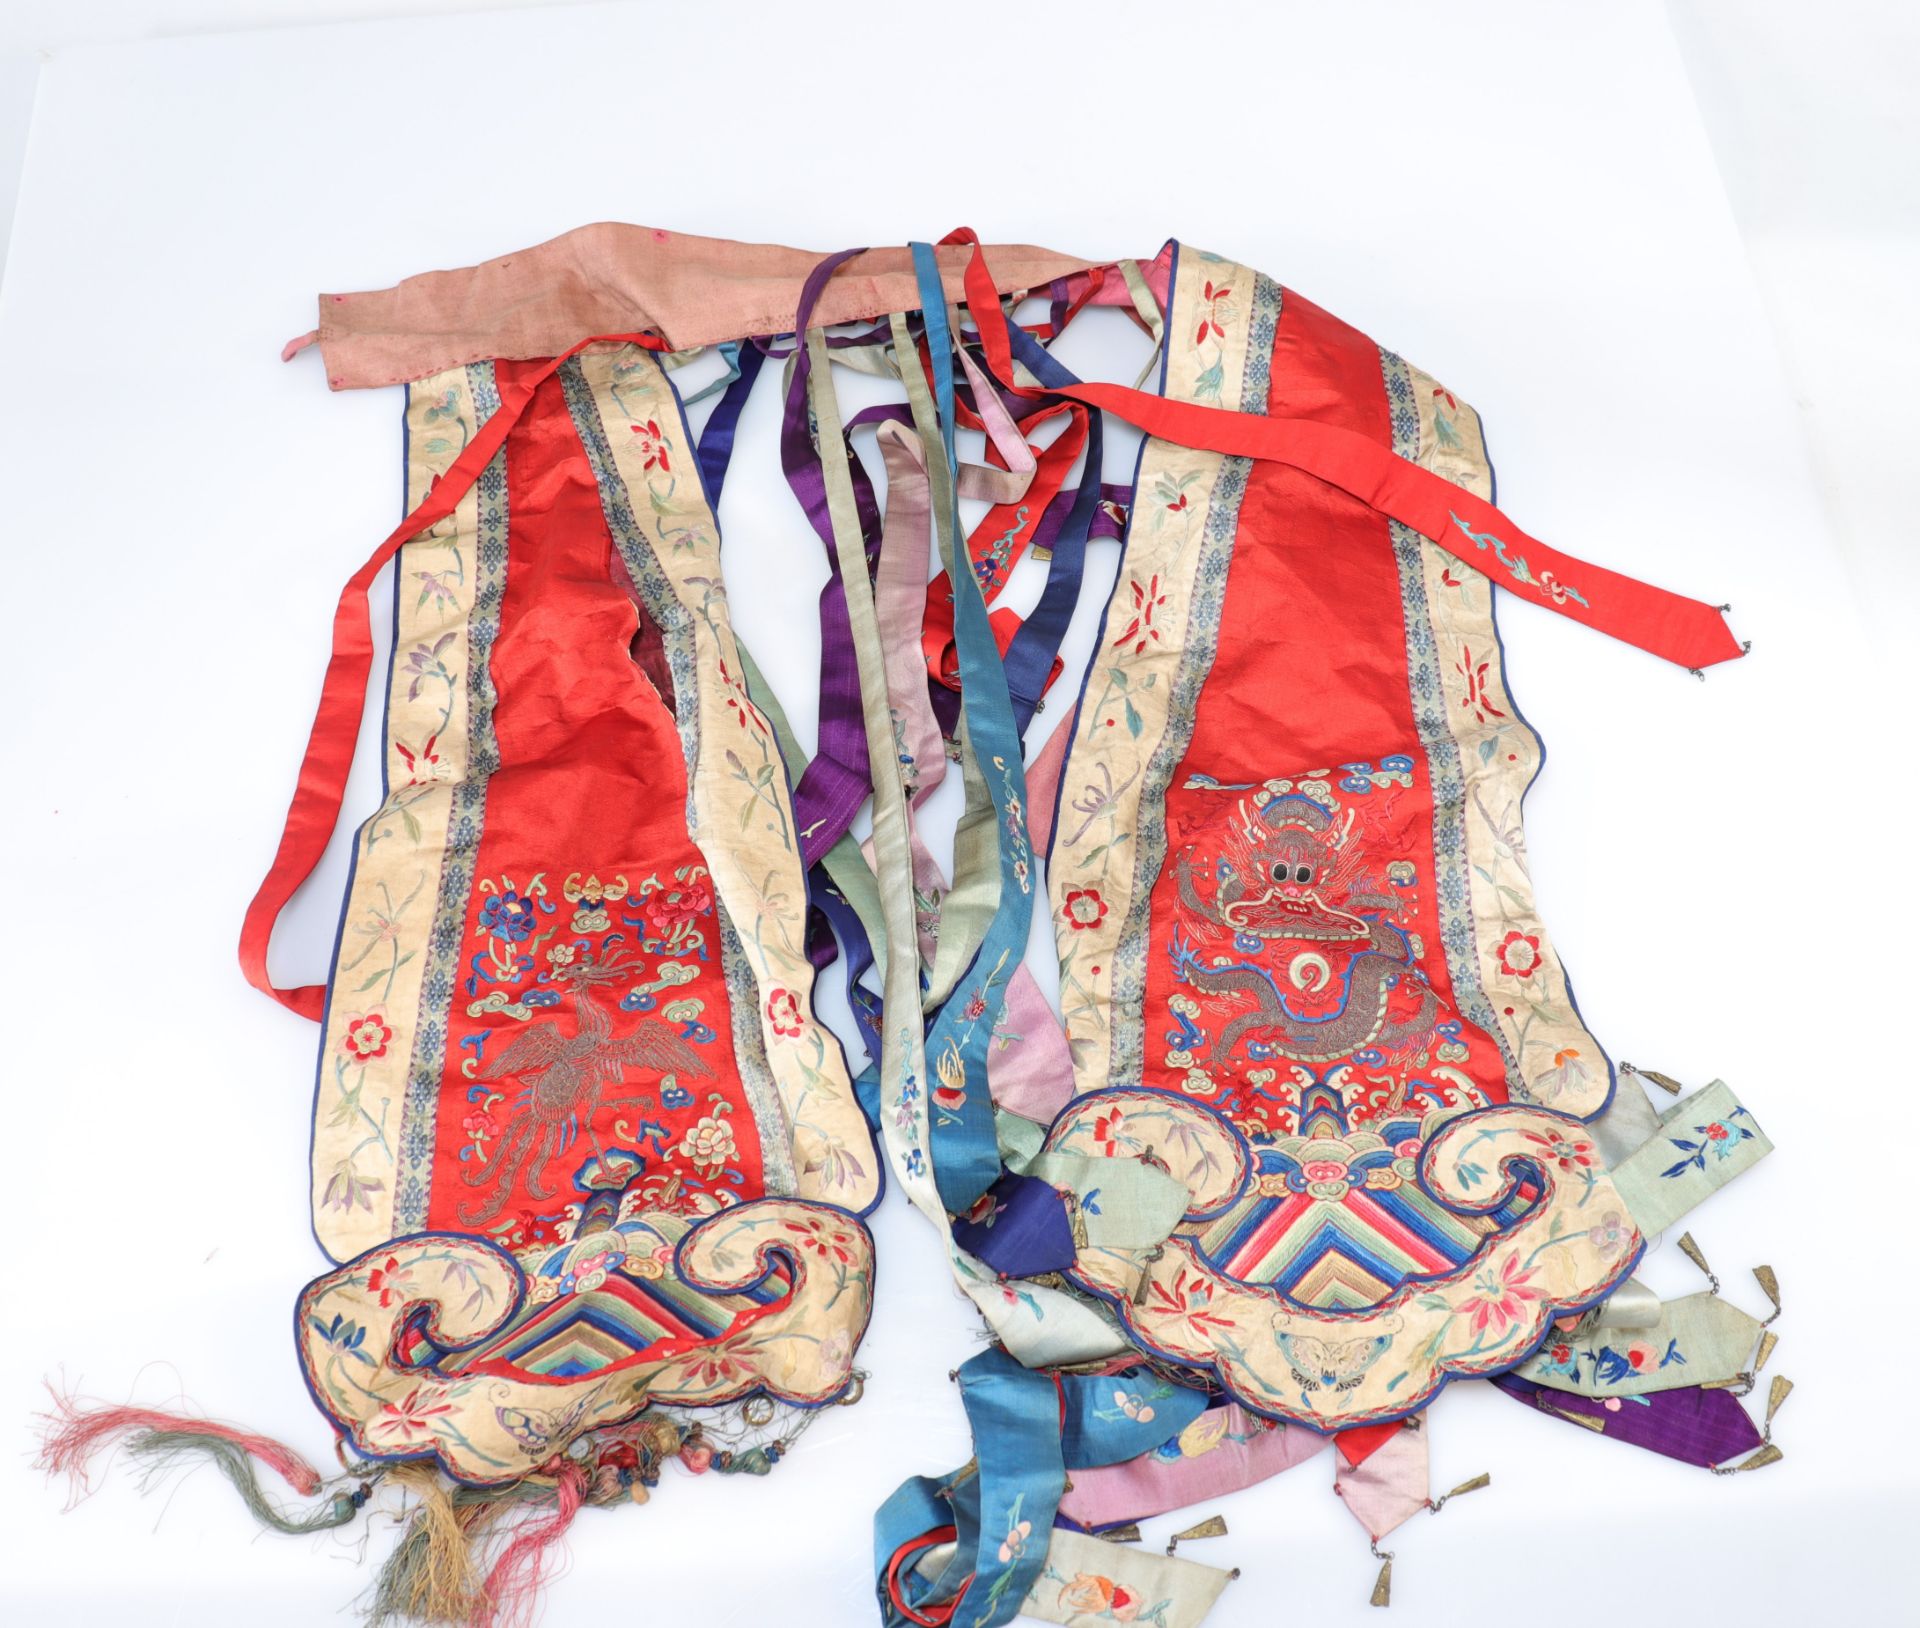 Embroidered Chinese Ceremonial Cloth - Image 2 of 2